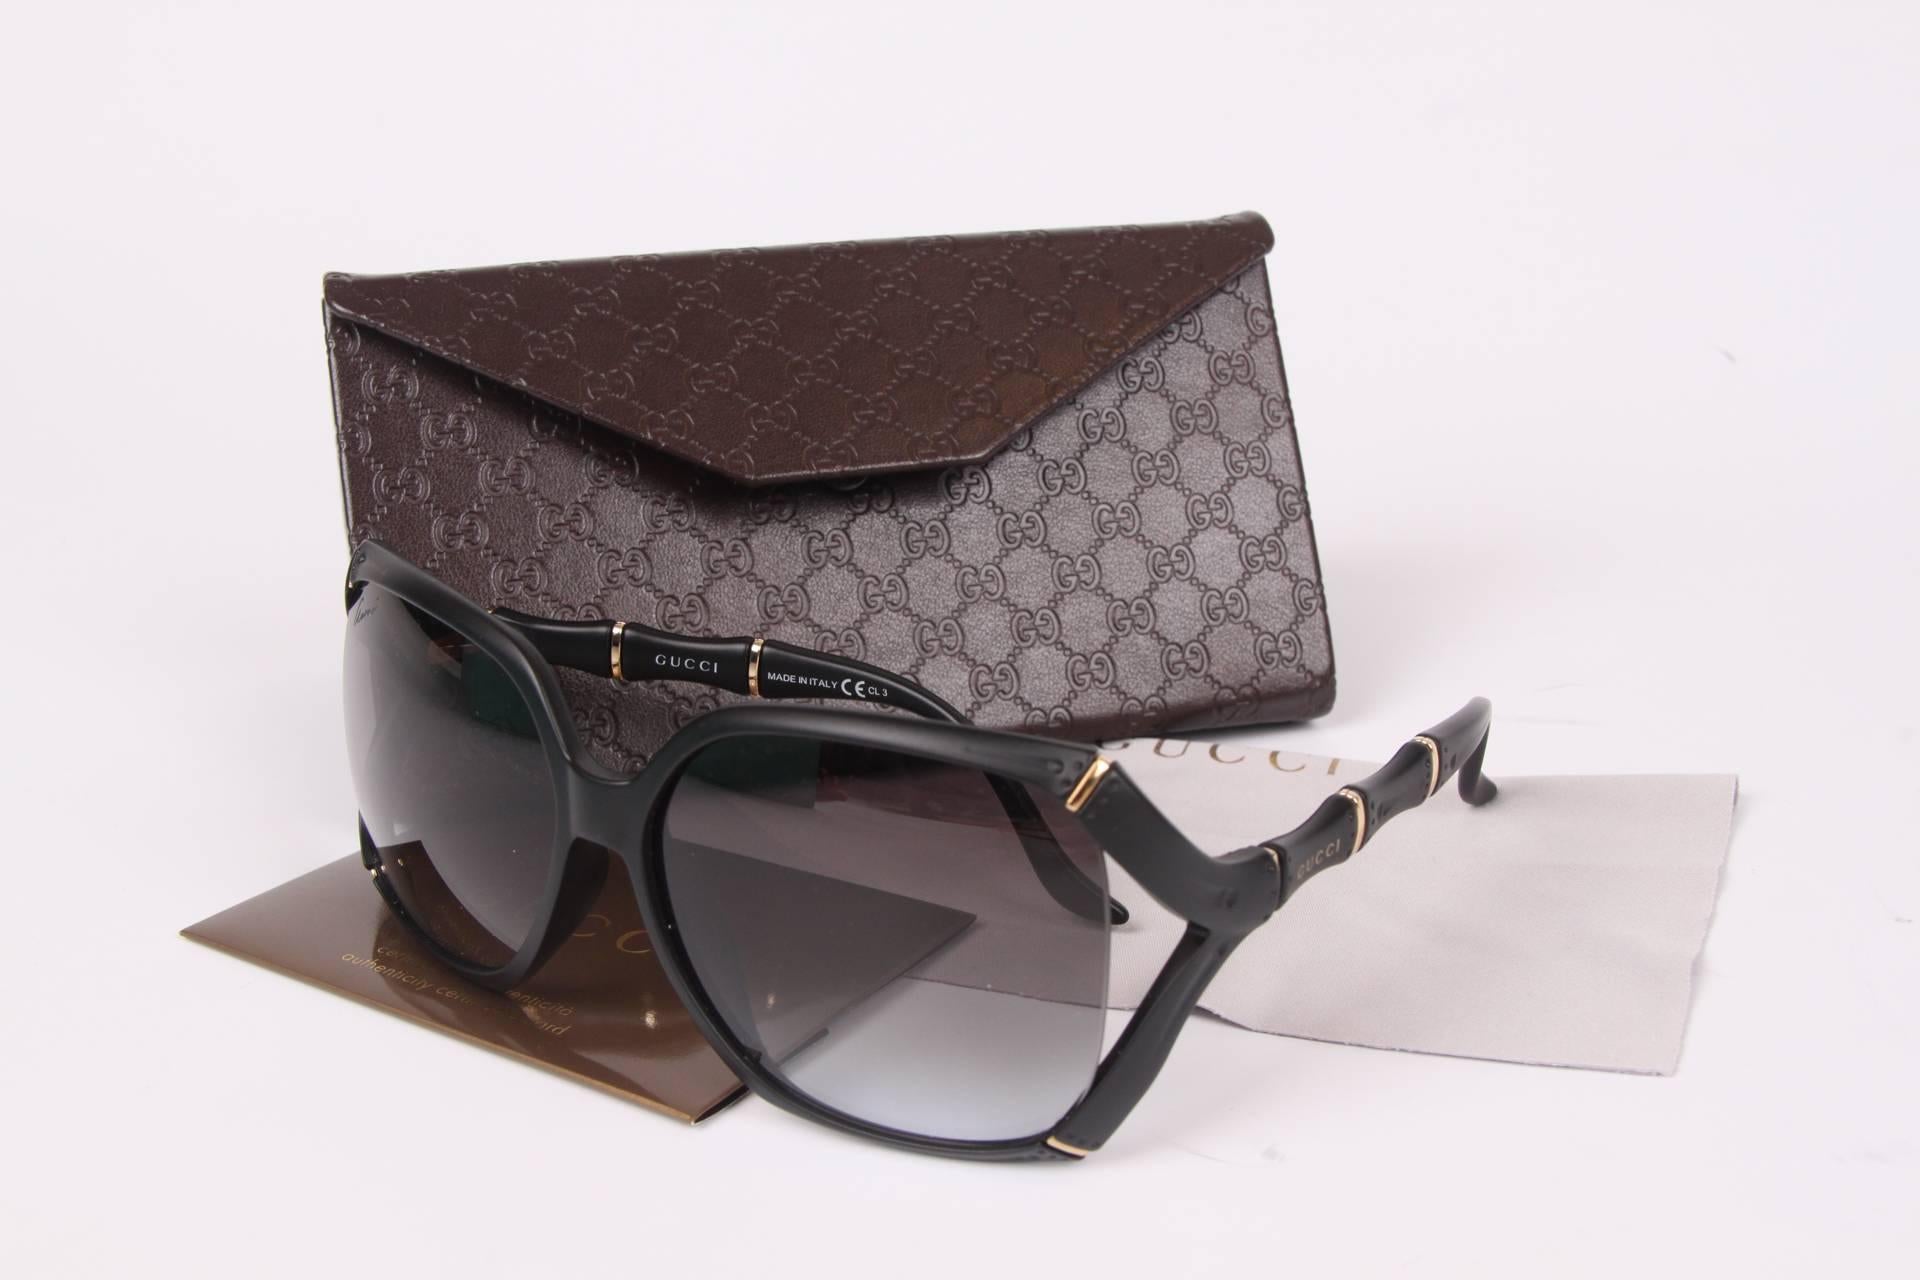 Gucci made this wonderful design! A marvellous pair of statement sunglasses in bamboo-look.

The frame is crafted in matte black acetate with shiny gold-tone detailing and large gray dégradé lenses. This pair of glasses is very wearable, because